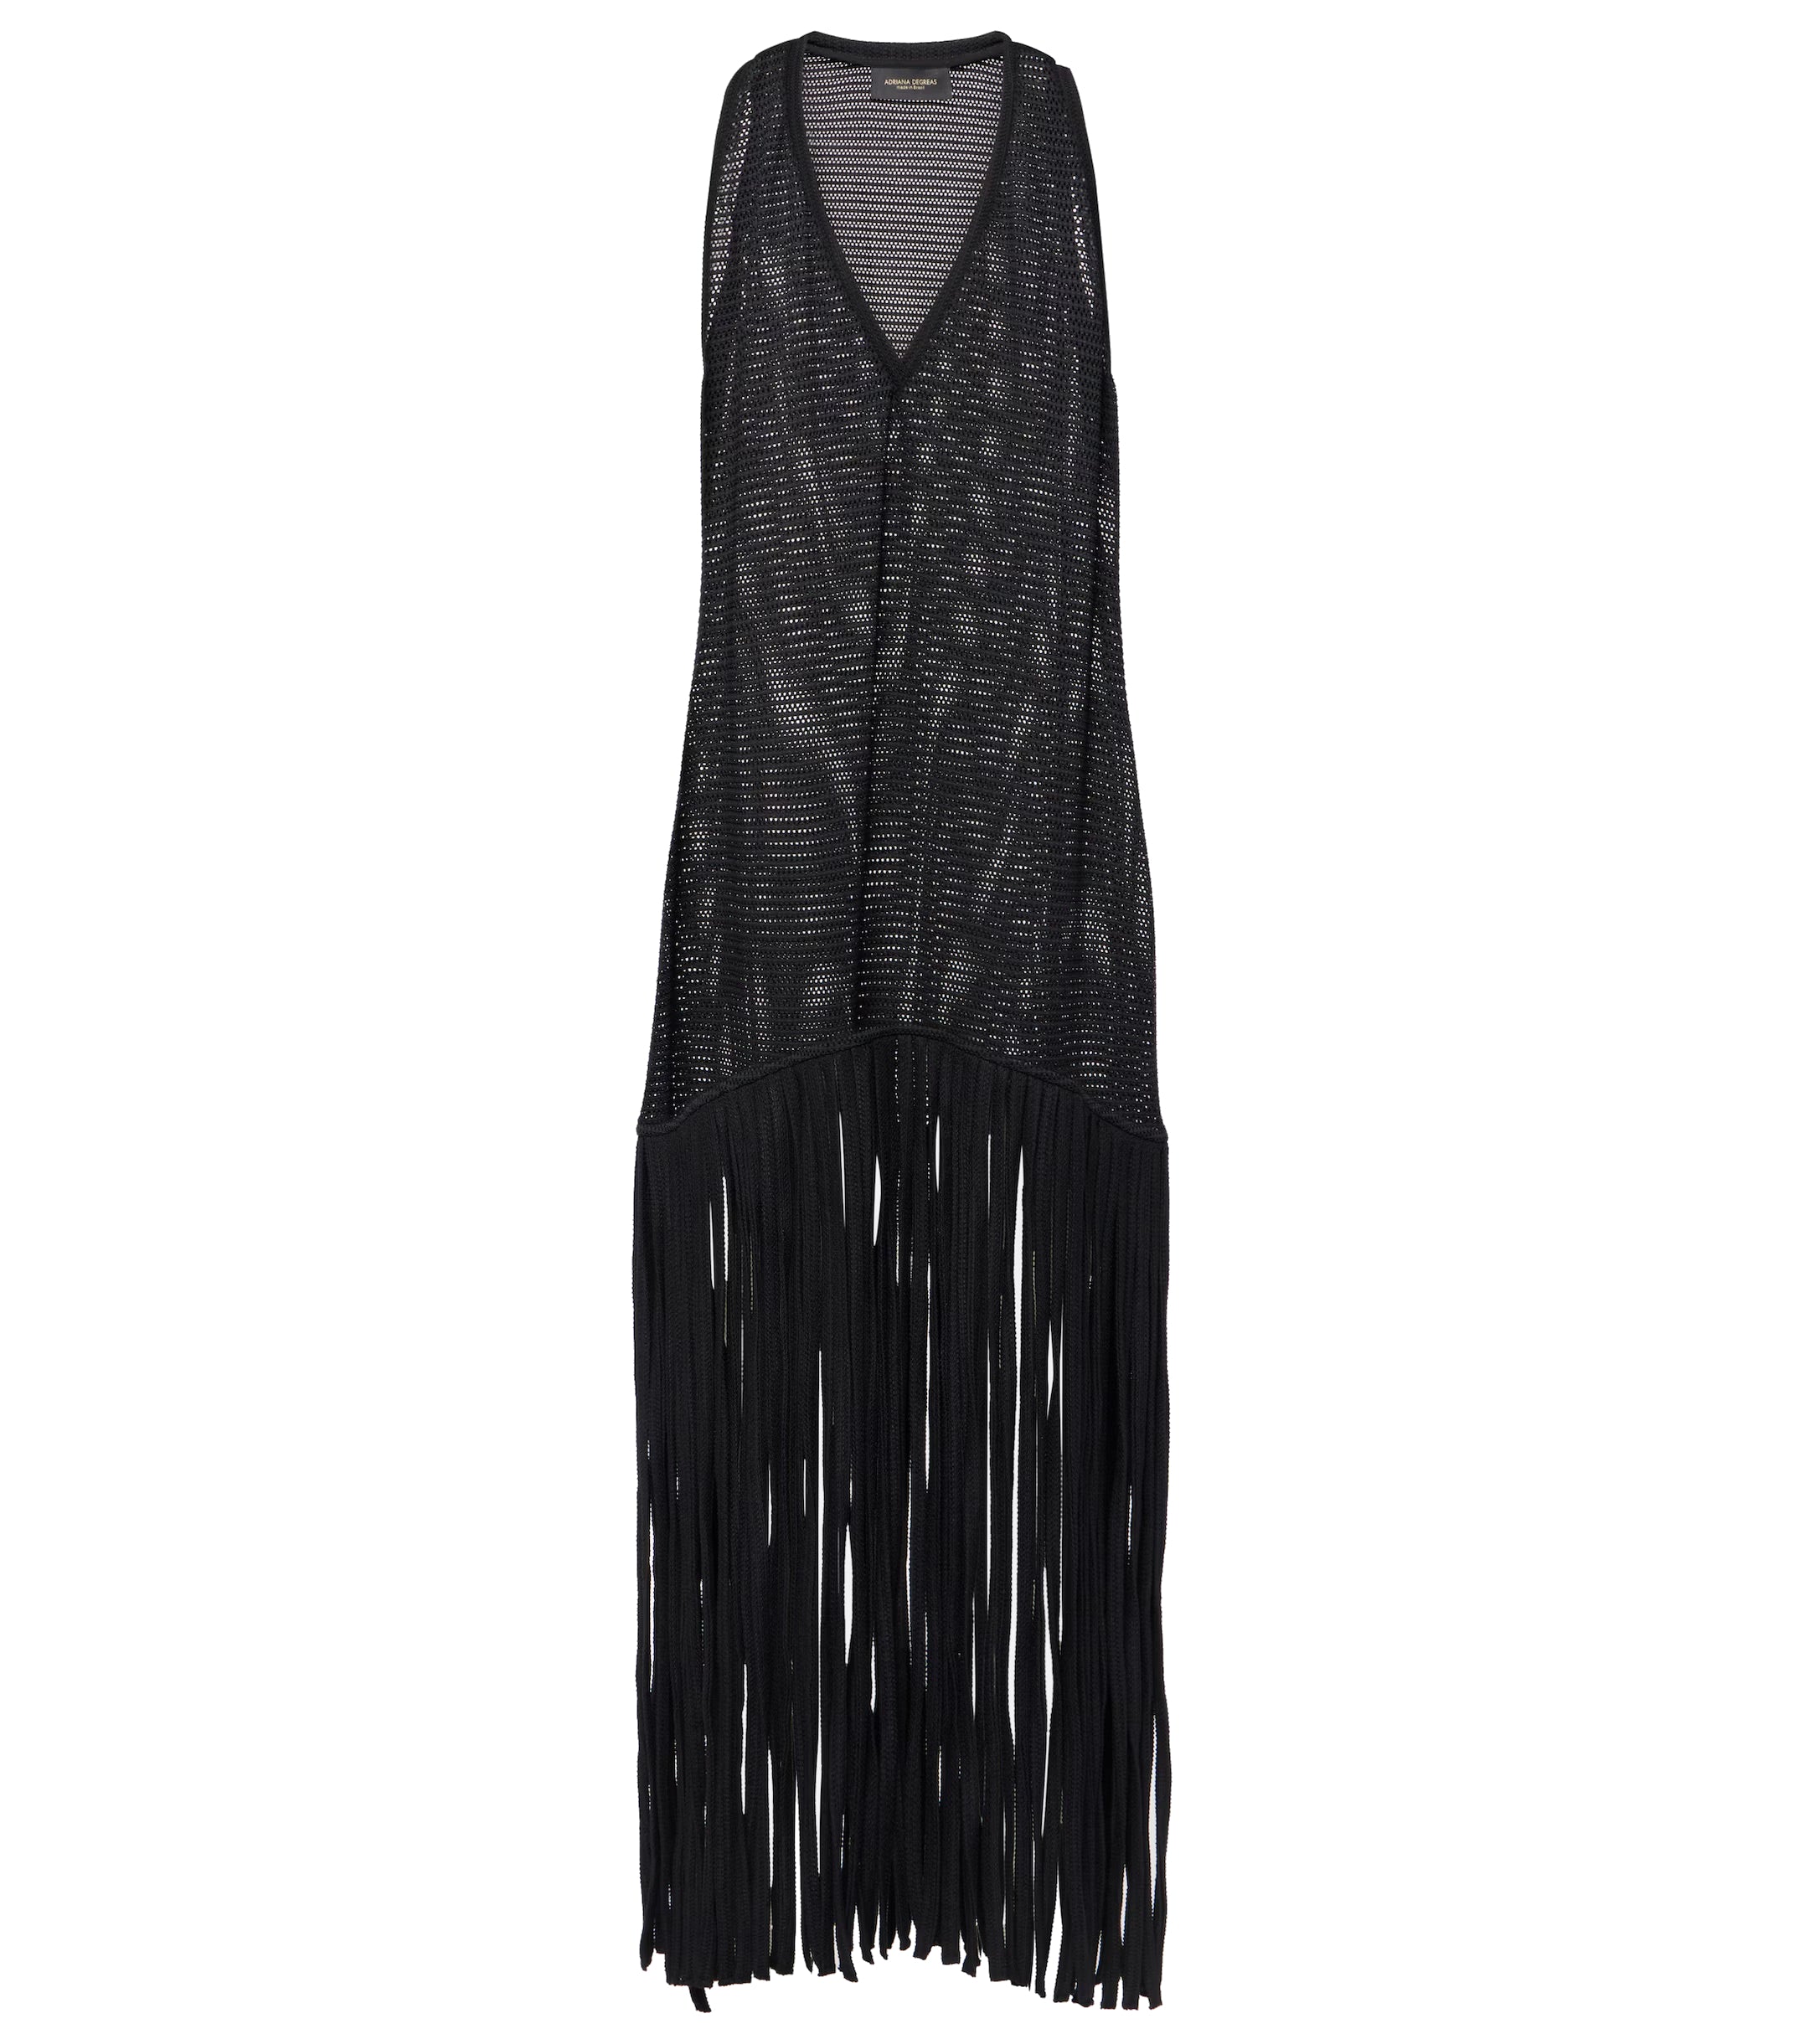 Tricot Black Knit Long Dress with Fringes Product